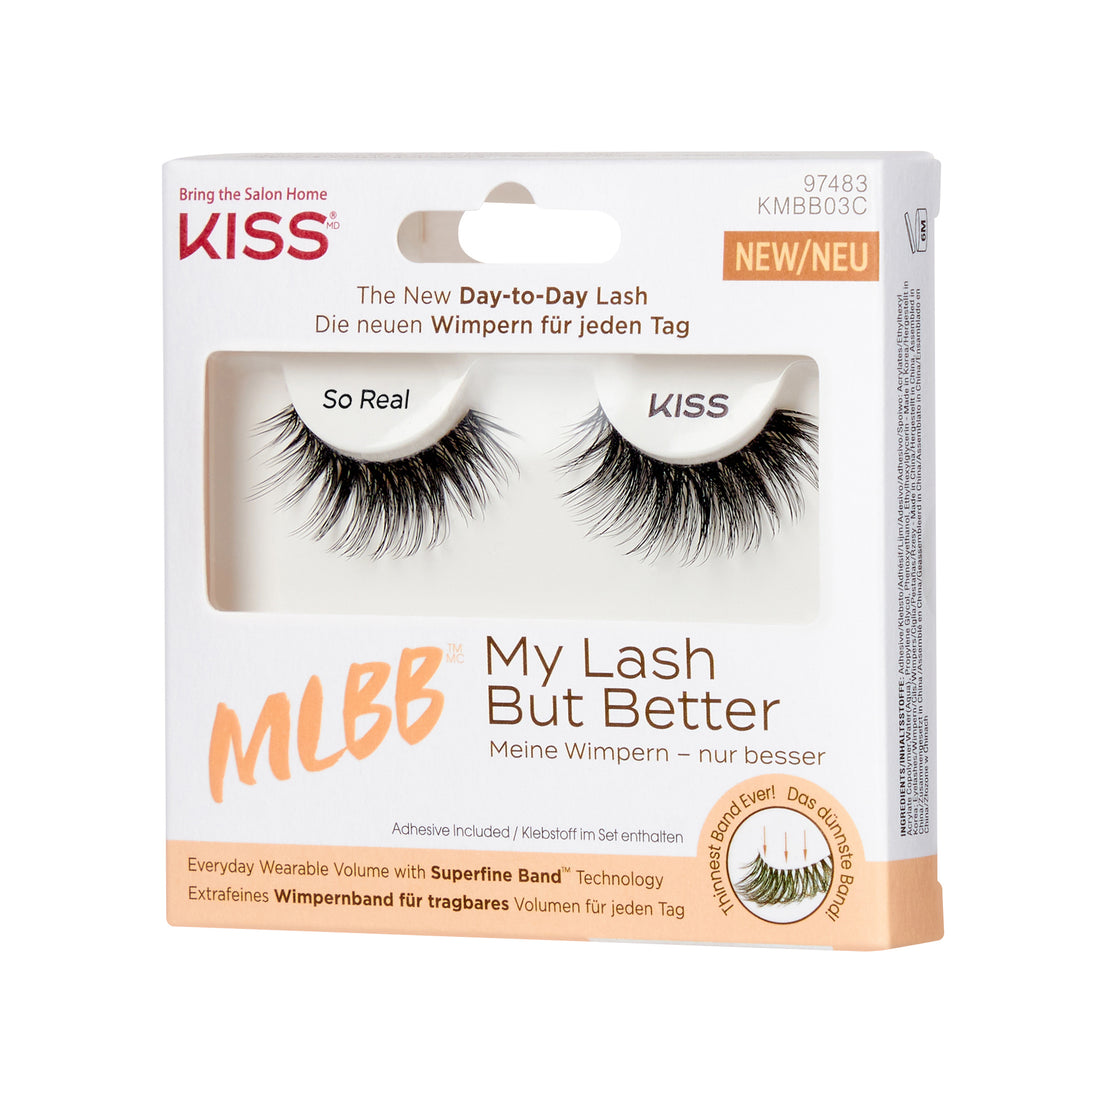 My Lash But Better - So Real